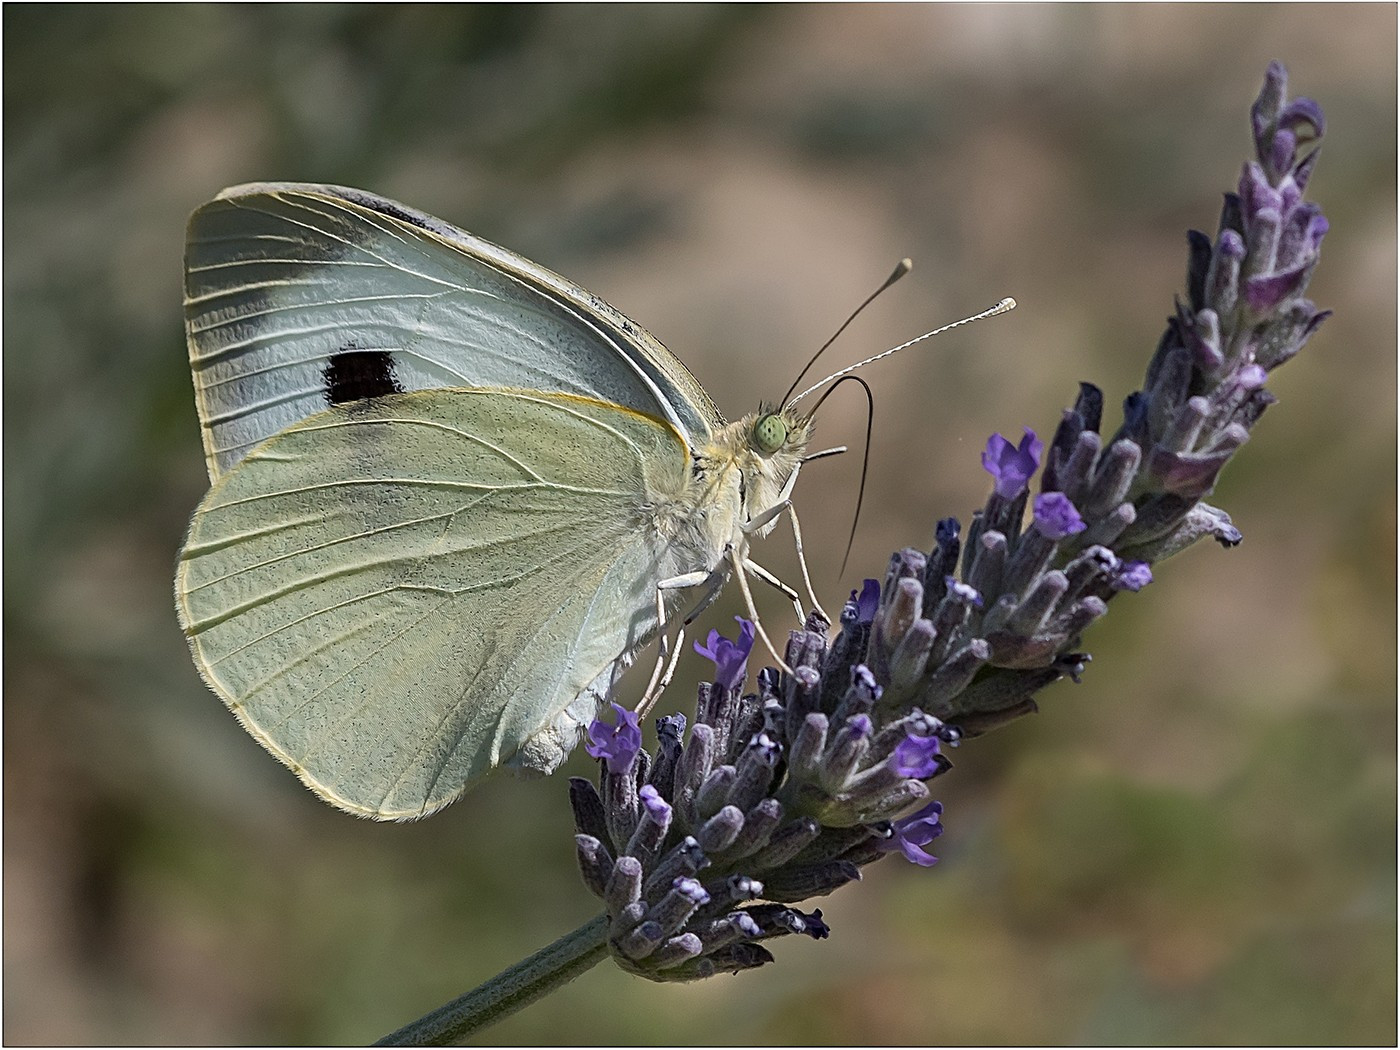 Large White Butterfly on Lavender